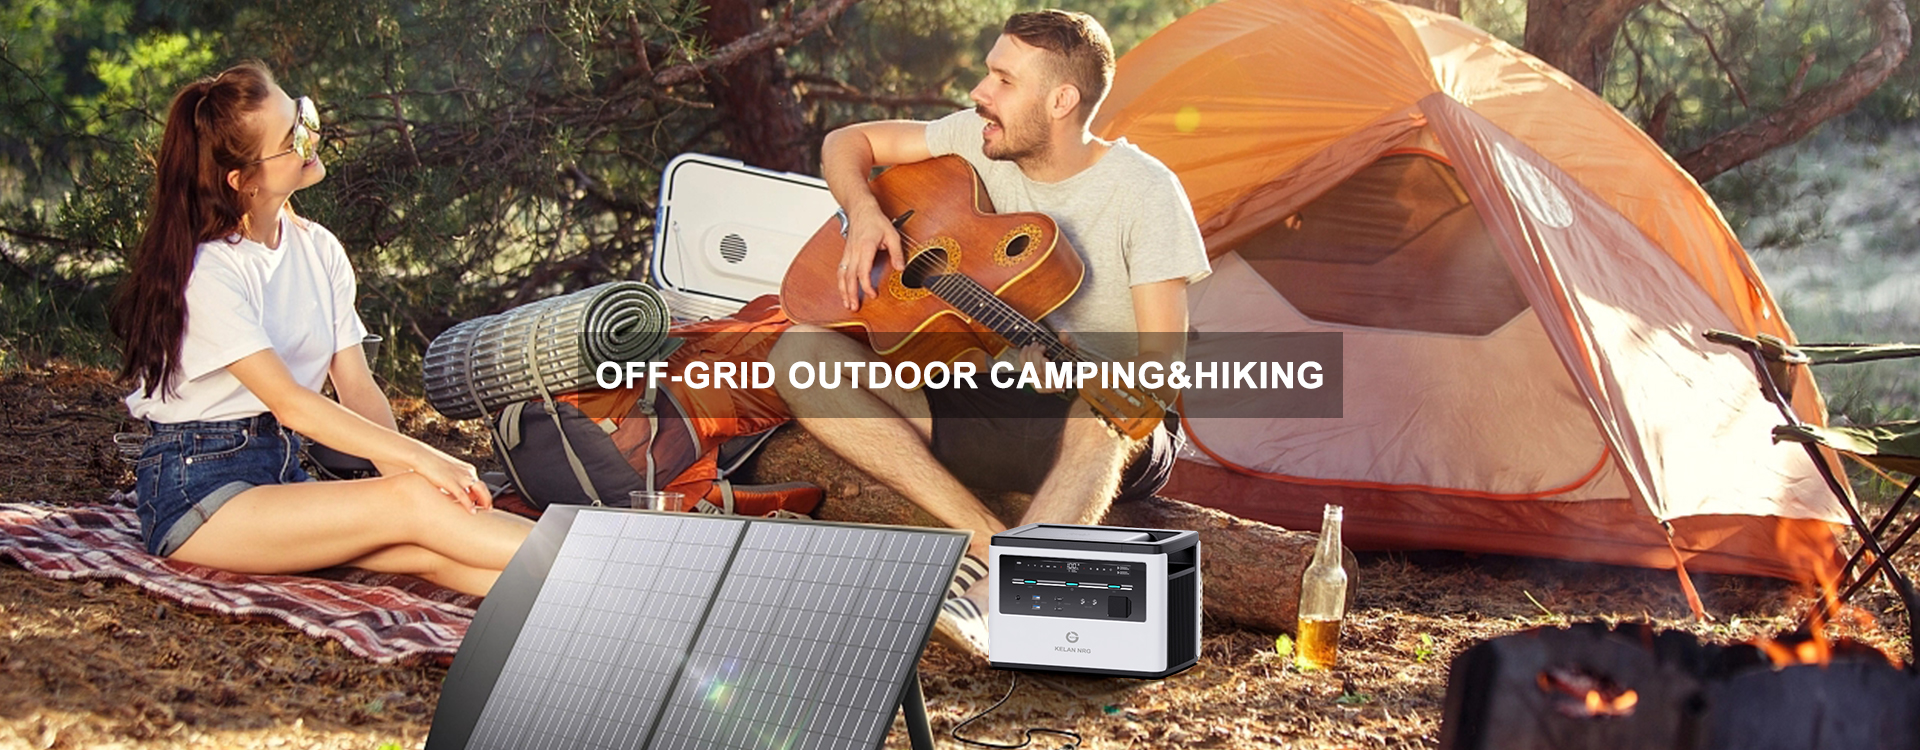 off-grid-outdoor-camping-hiking